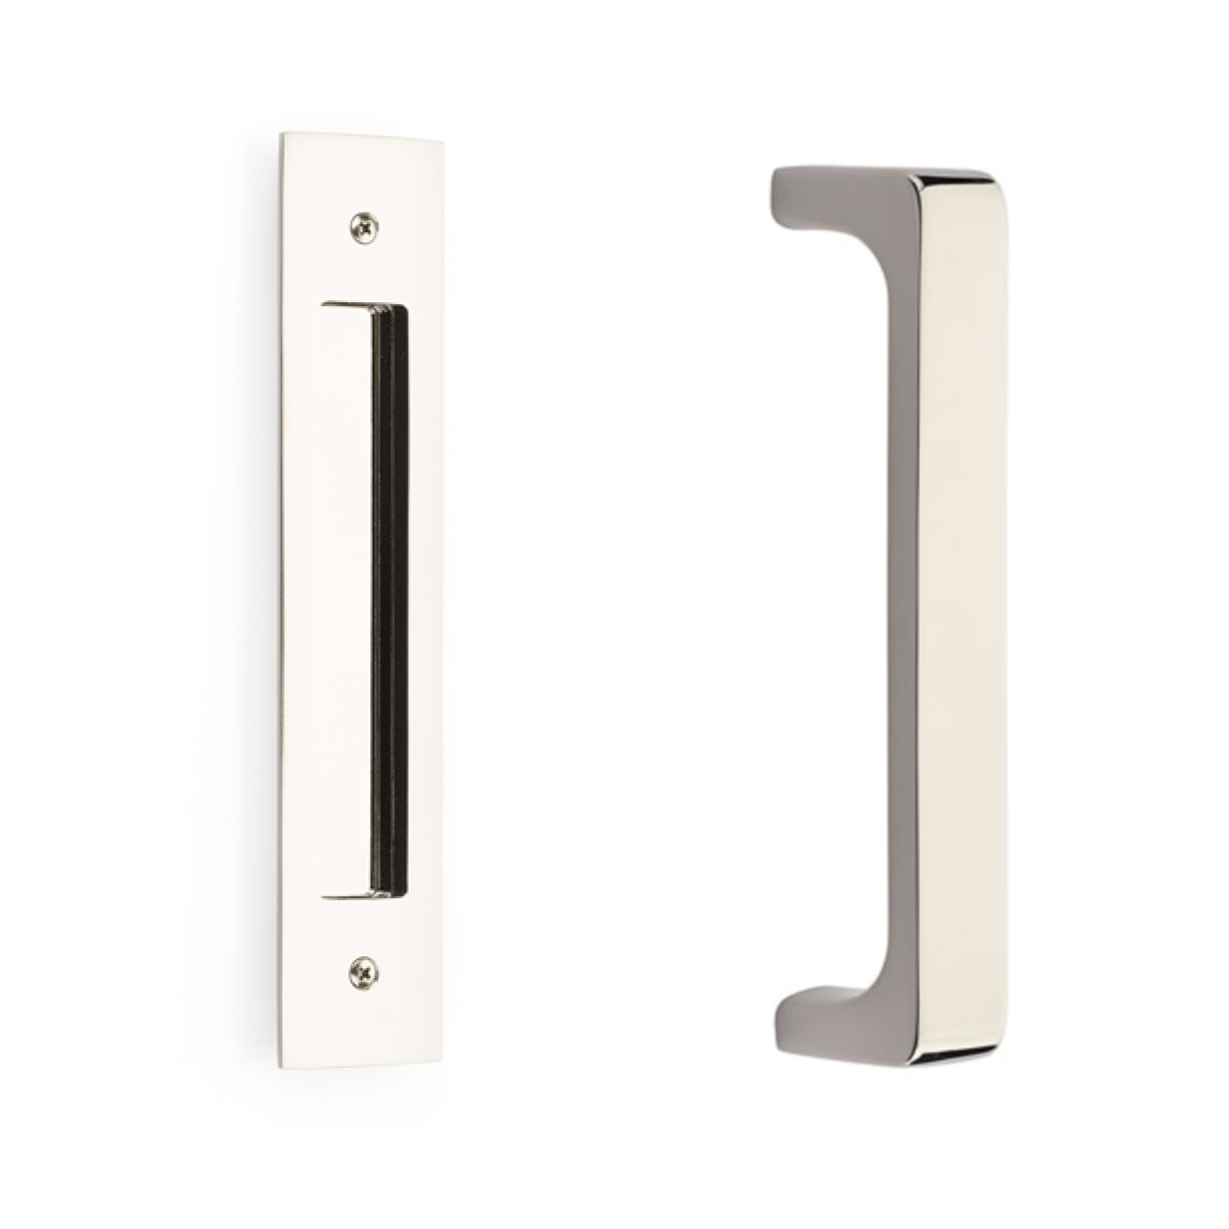 Door Flush Pull and Handle Hardware for Interior Sliding and Barn Doors